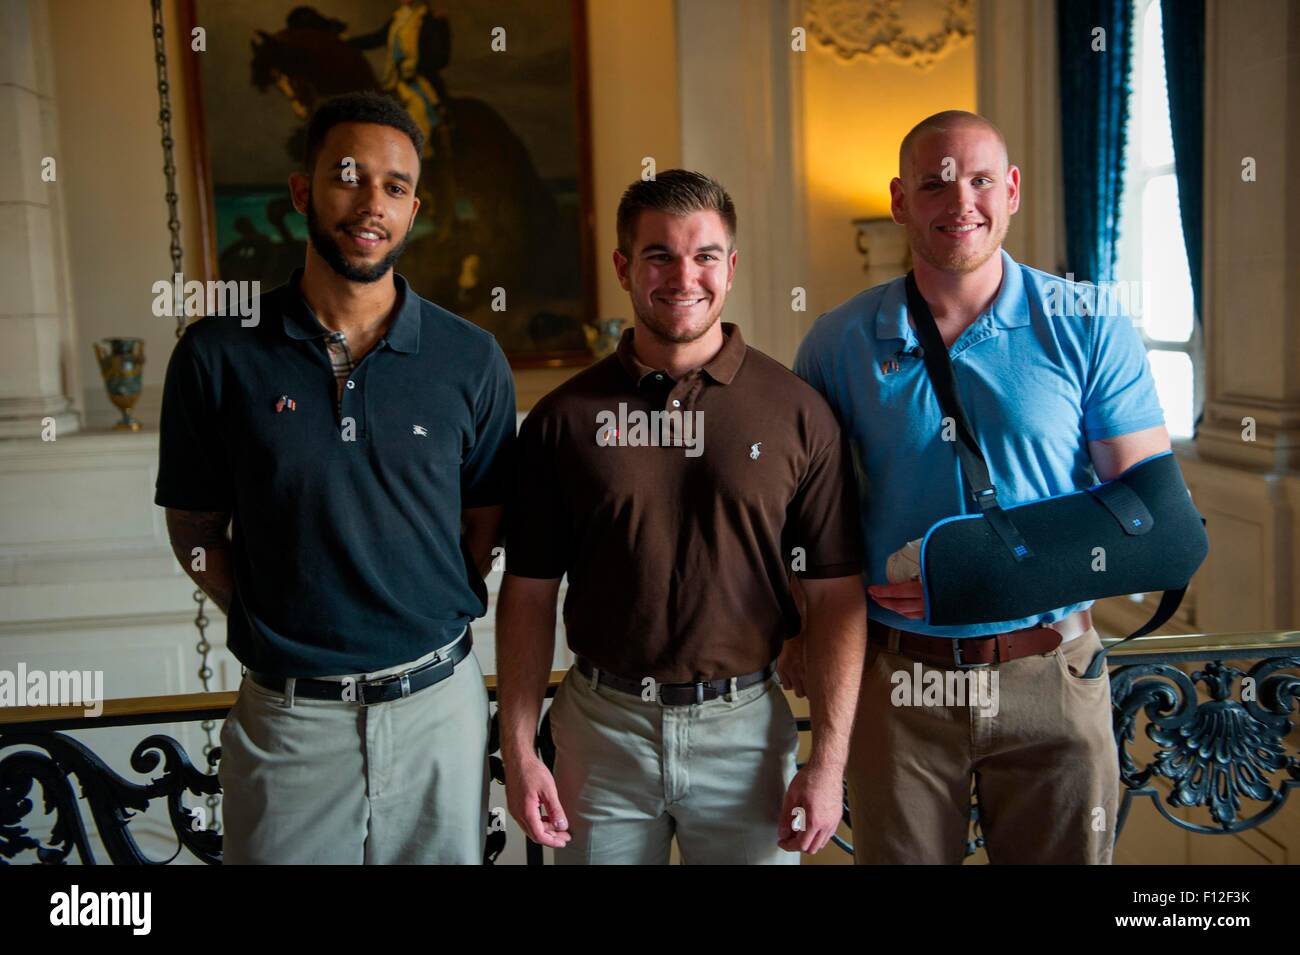 Paris, France. 24th Aug, 2015. Anthony Sadler, Aleksander Skarlatos and Spencer Stone pose before a press conference with Ambassador Jane Hartley at the residence August 23, 2015 in Paris, France. The three Americans along with and British businessman Chris Norman thwarted a terrorist attack on a French train. Stock Photo